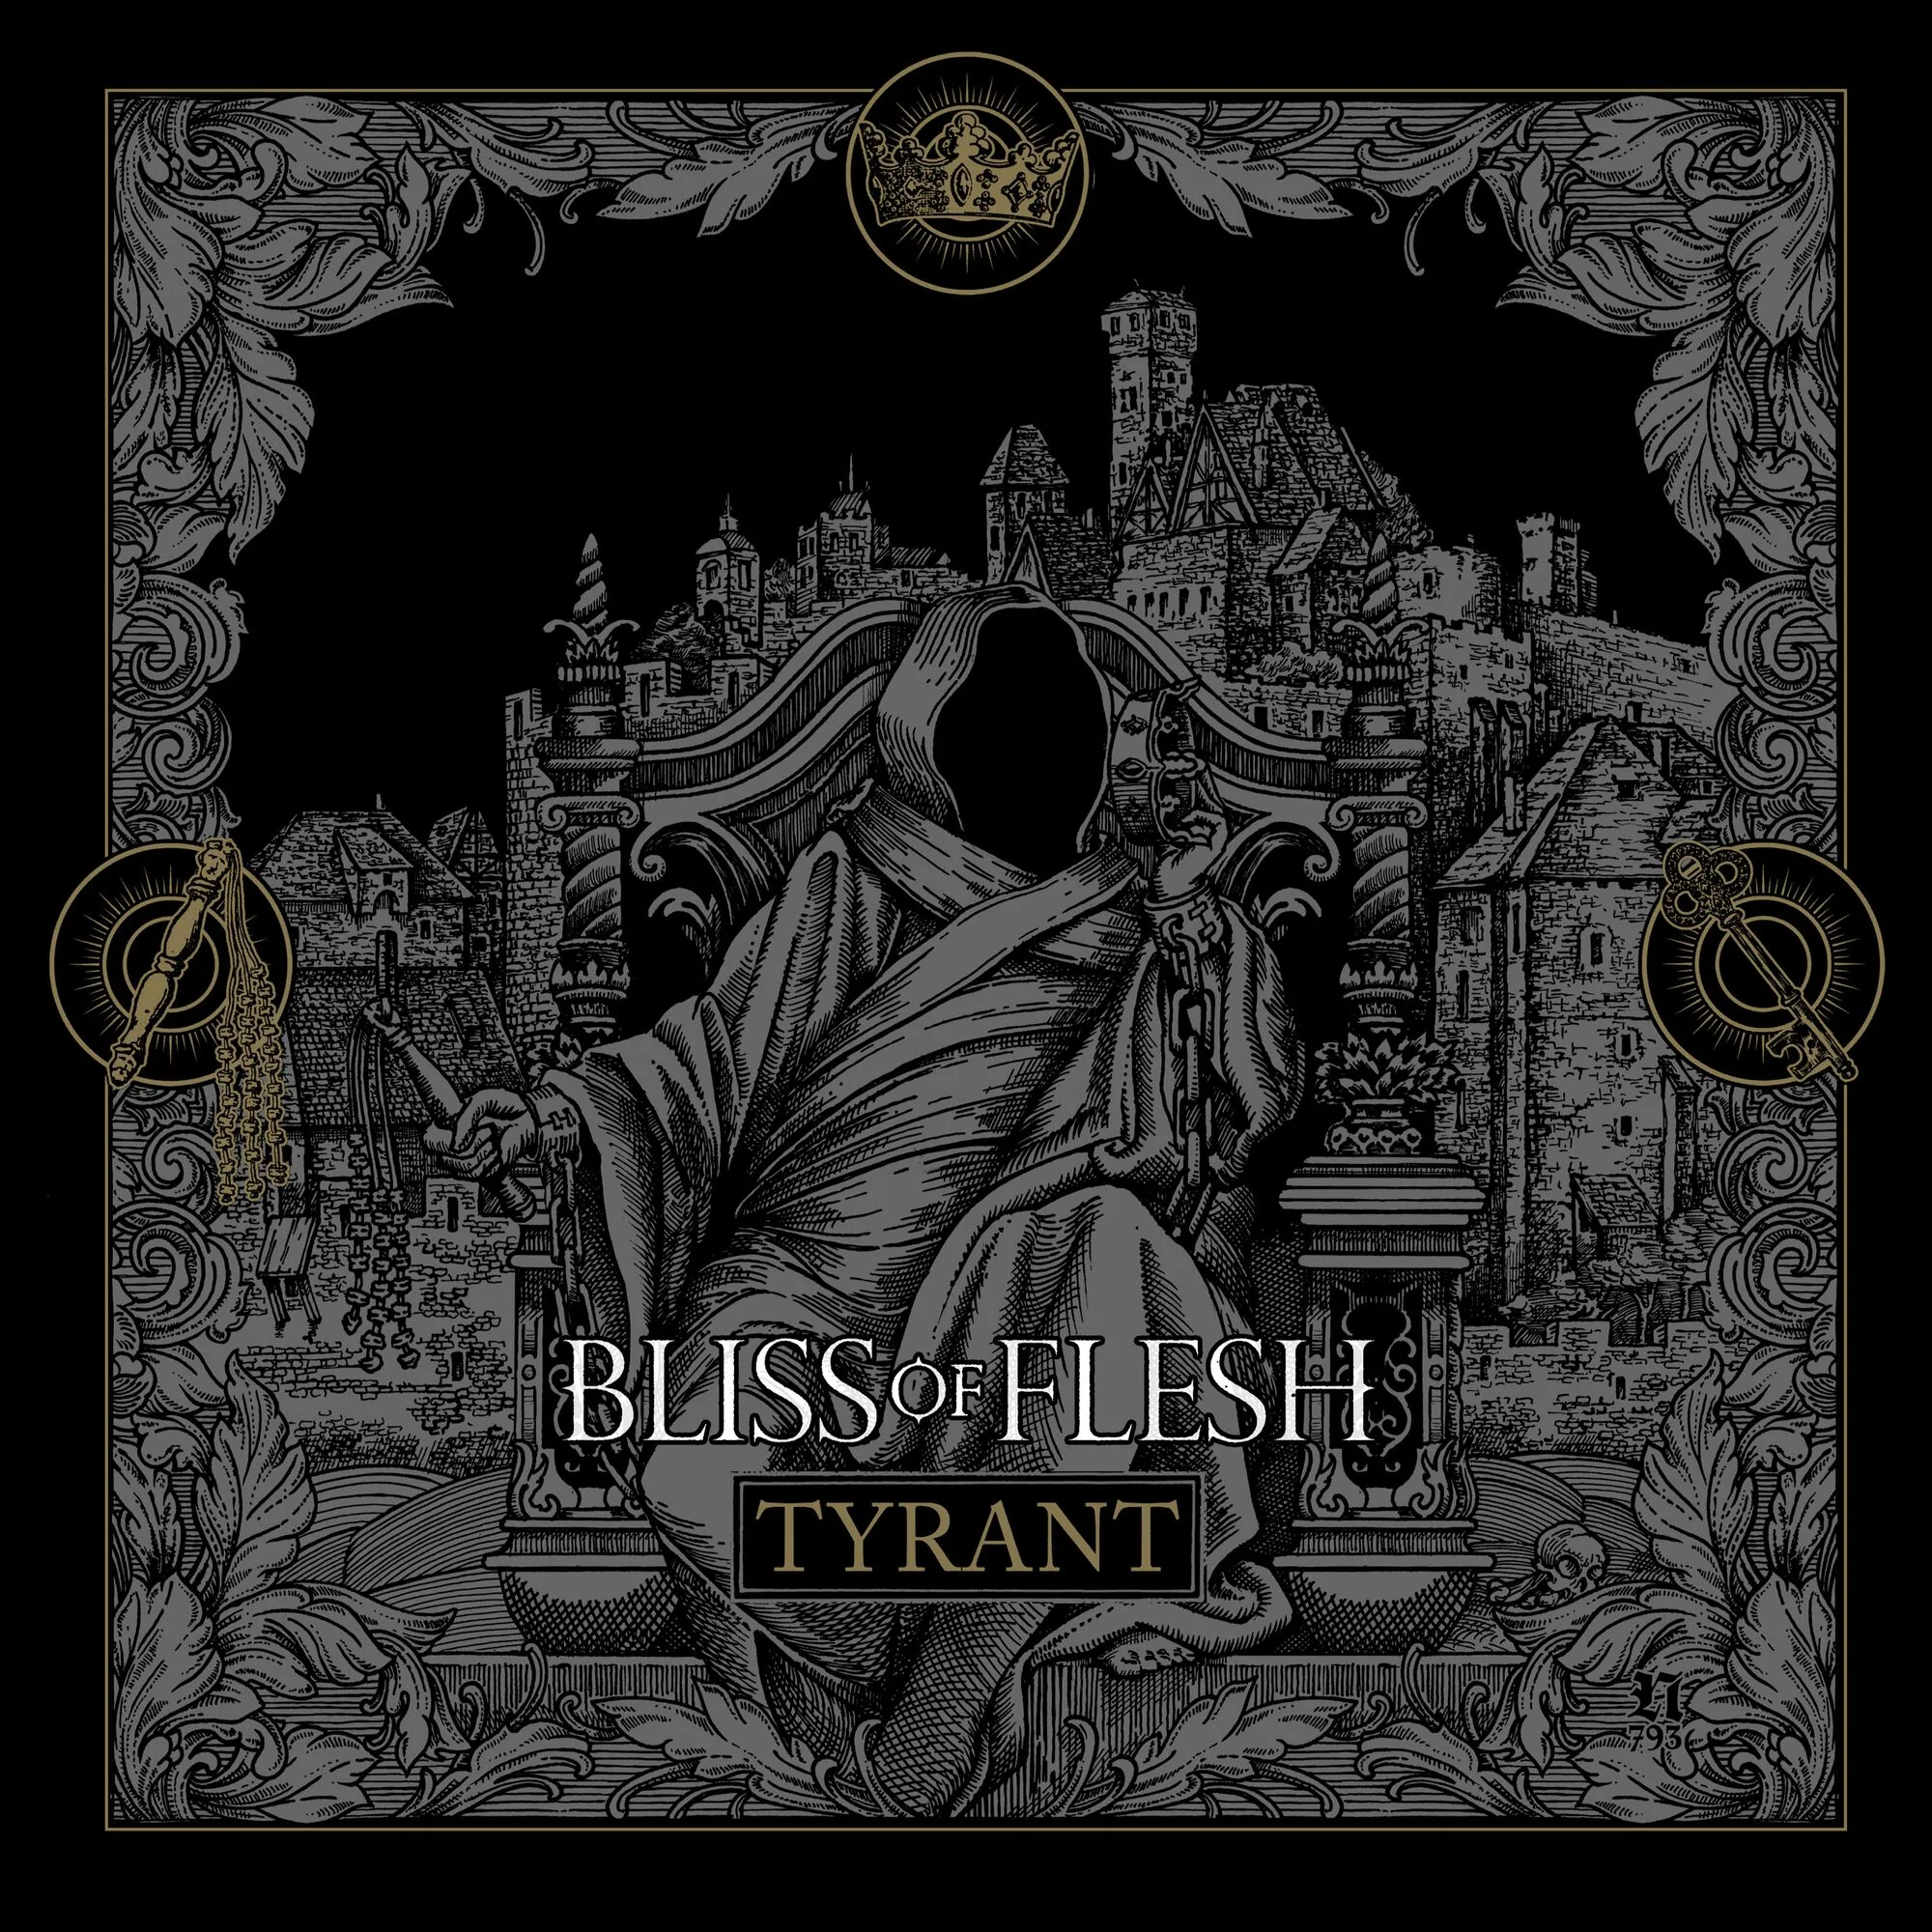 Tyrant by Bliss of Flesh